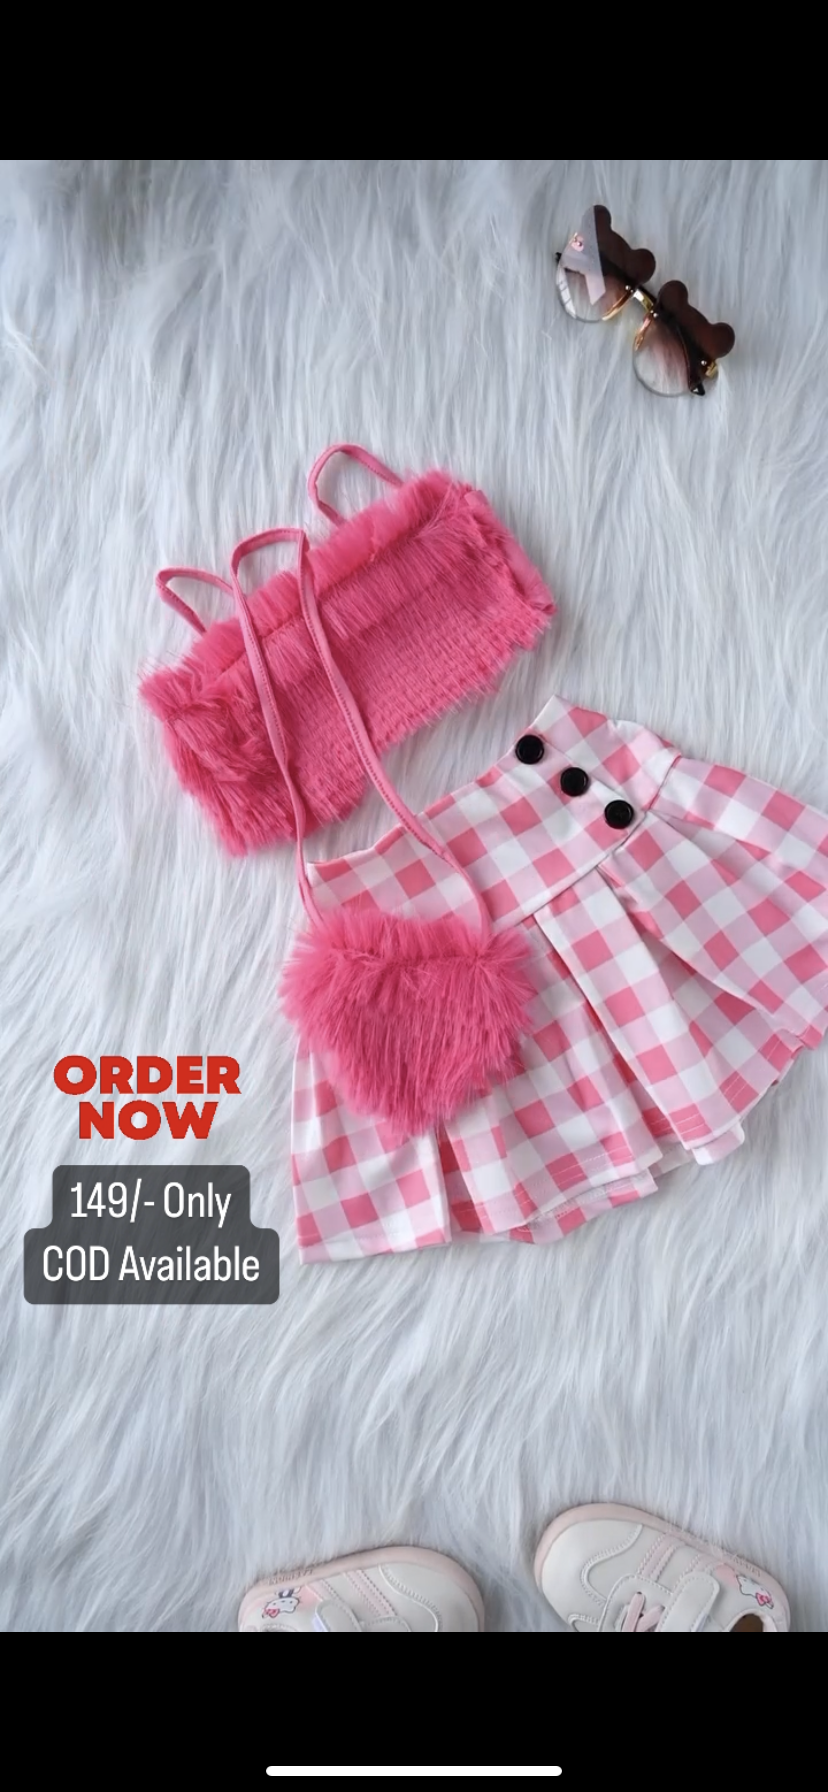 Baby Pink Color Top And Skirt For Kids On Sale